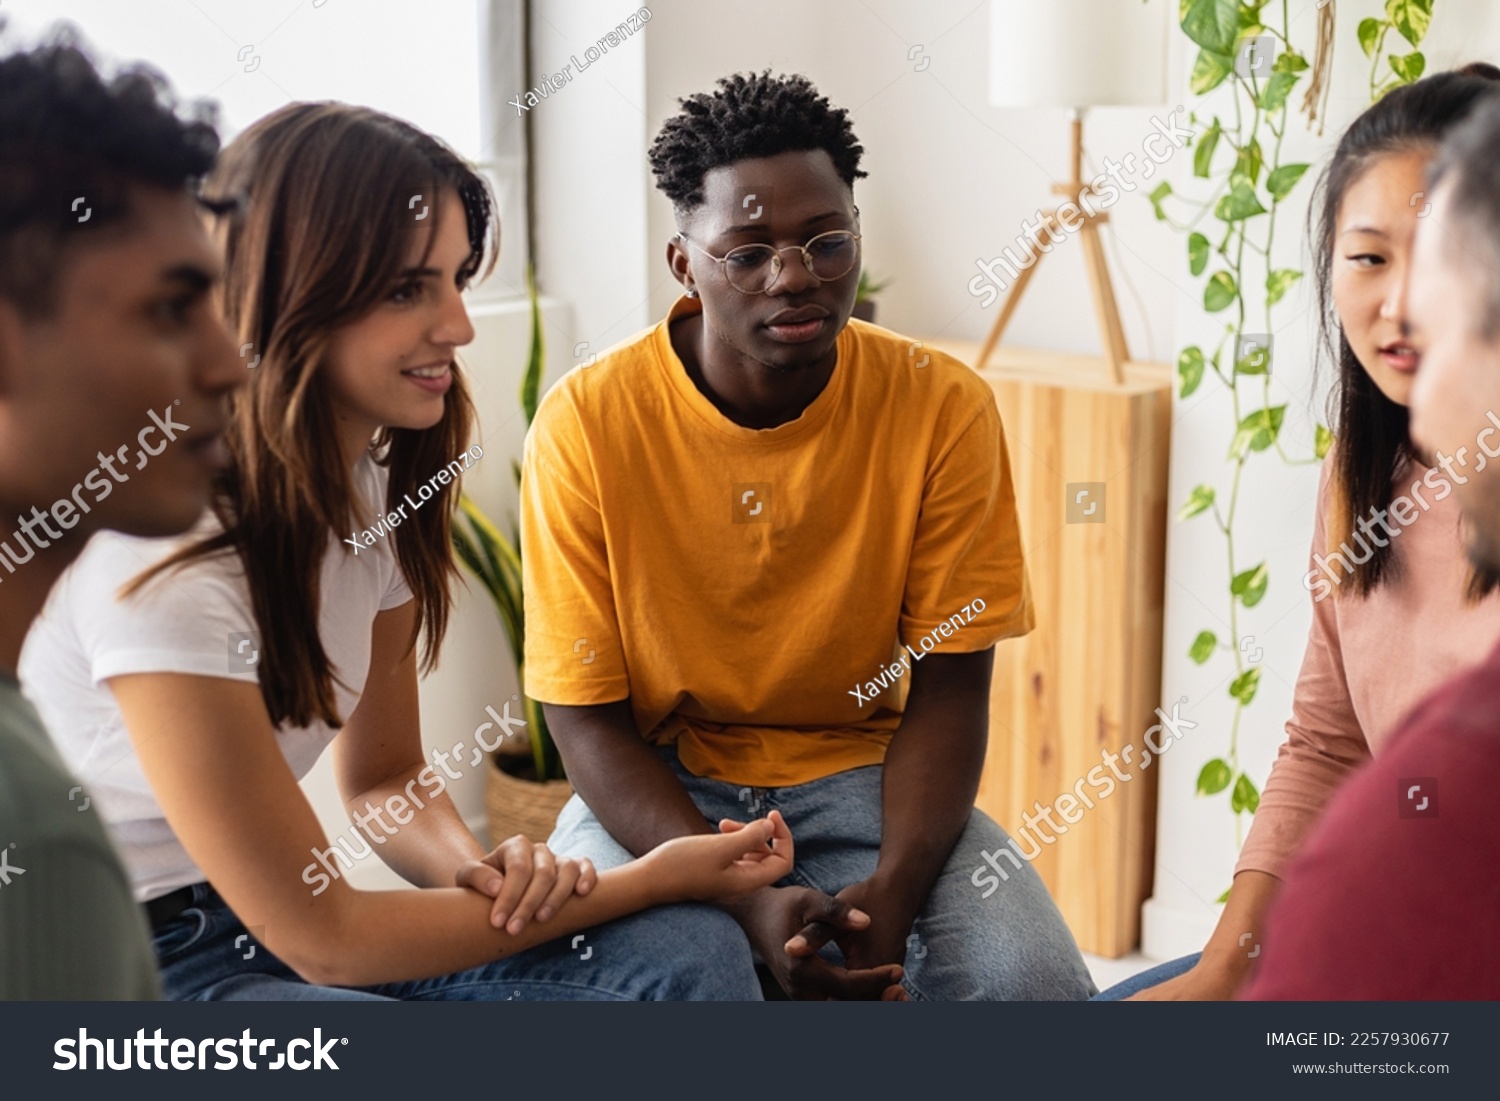 Multiracial people sitting in circle during group therapy supporting each other. Diversity, mental health and support concept. People communicating while sitting in circle and gesturing. #2257930677